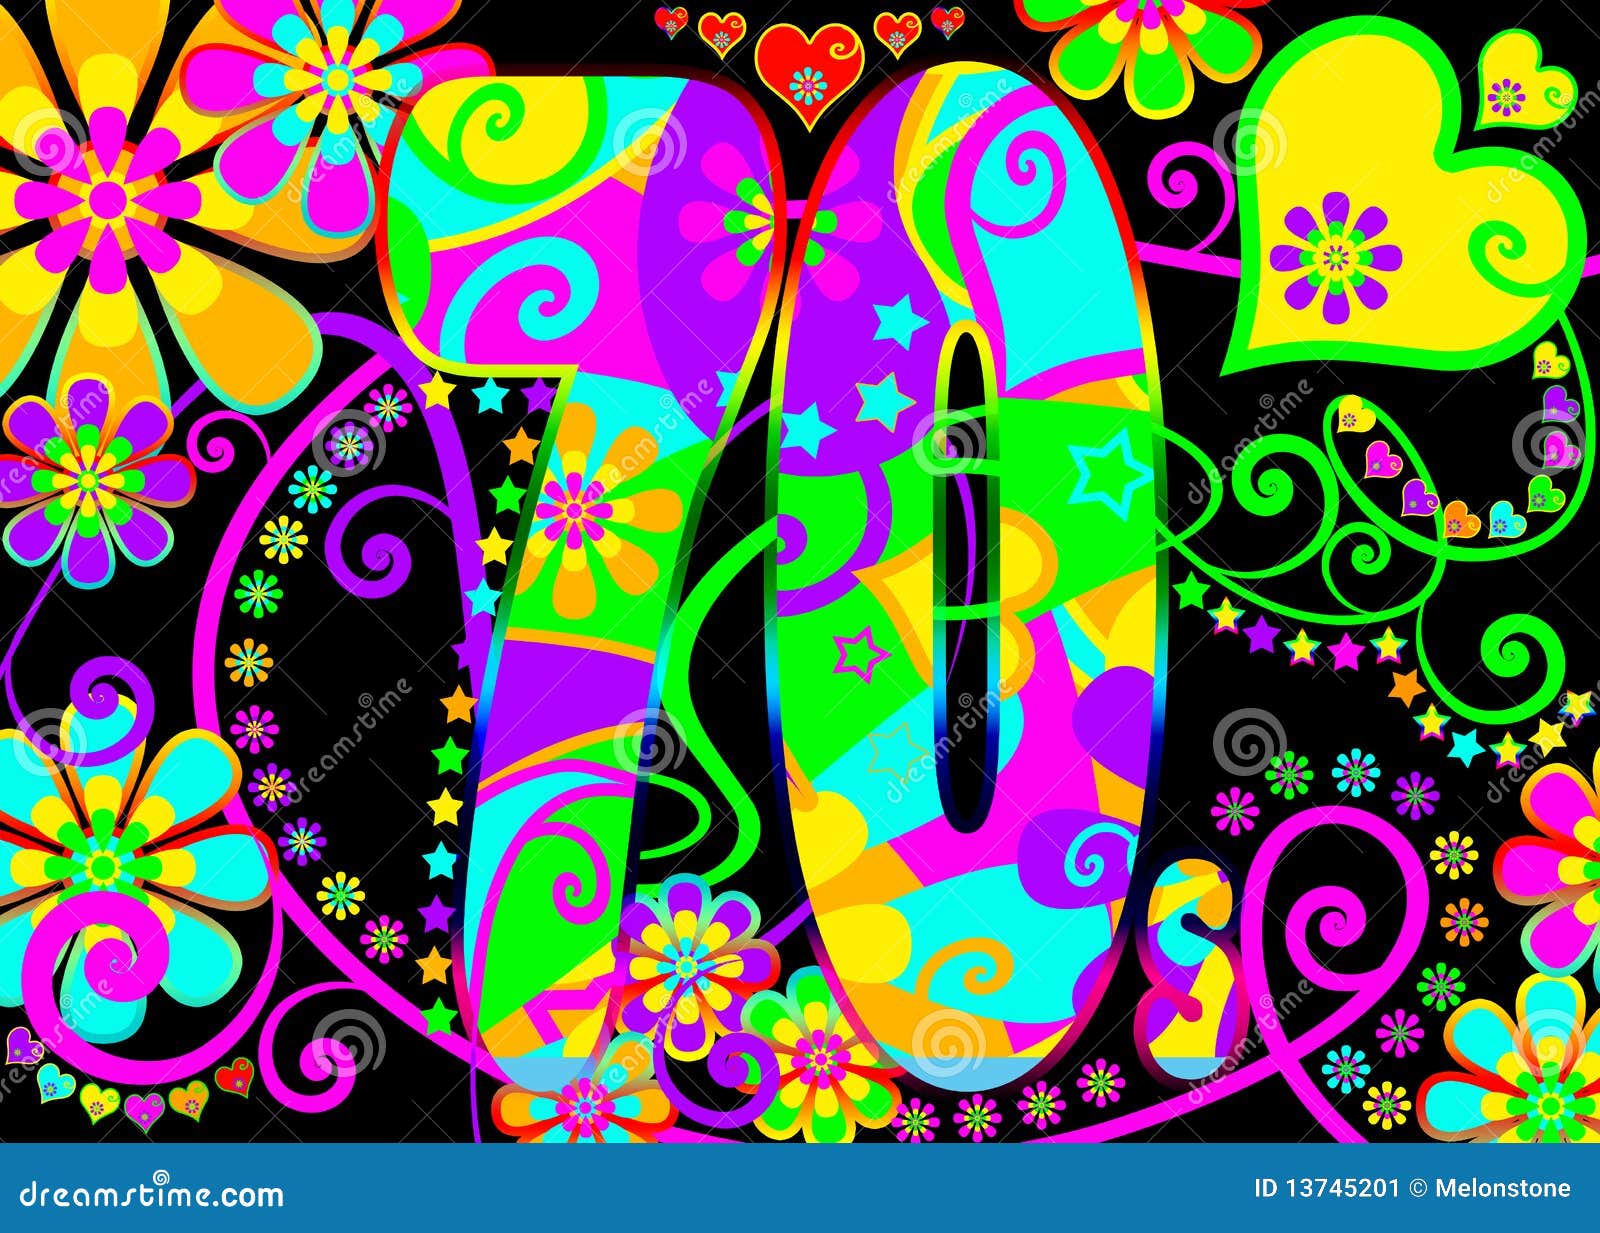 Vintage Psychedelic 70s Party Stock Illustration - Image: 13745201